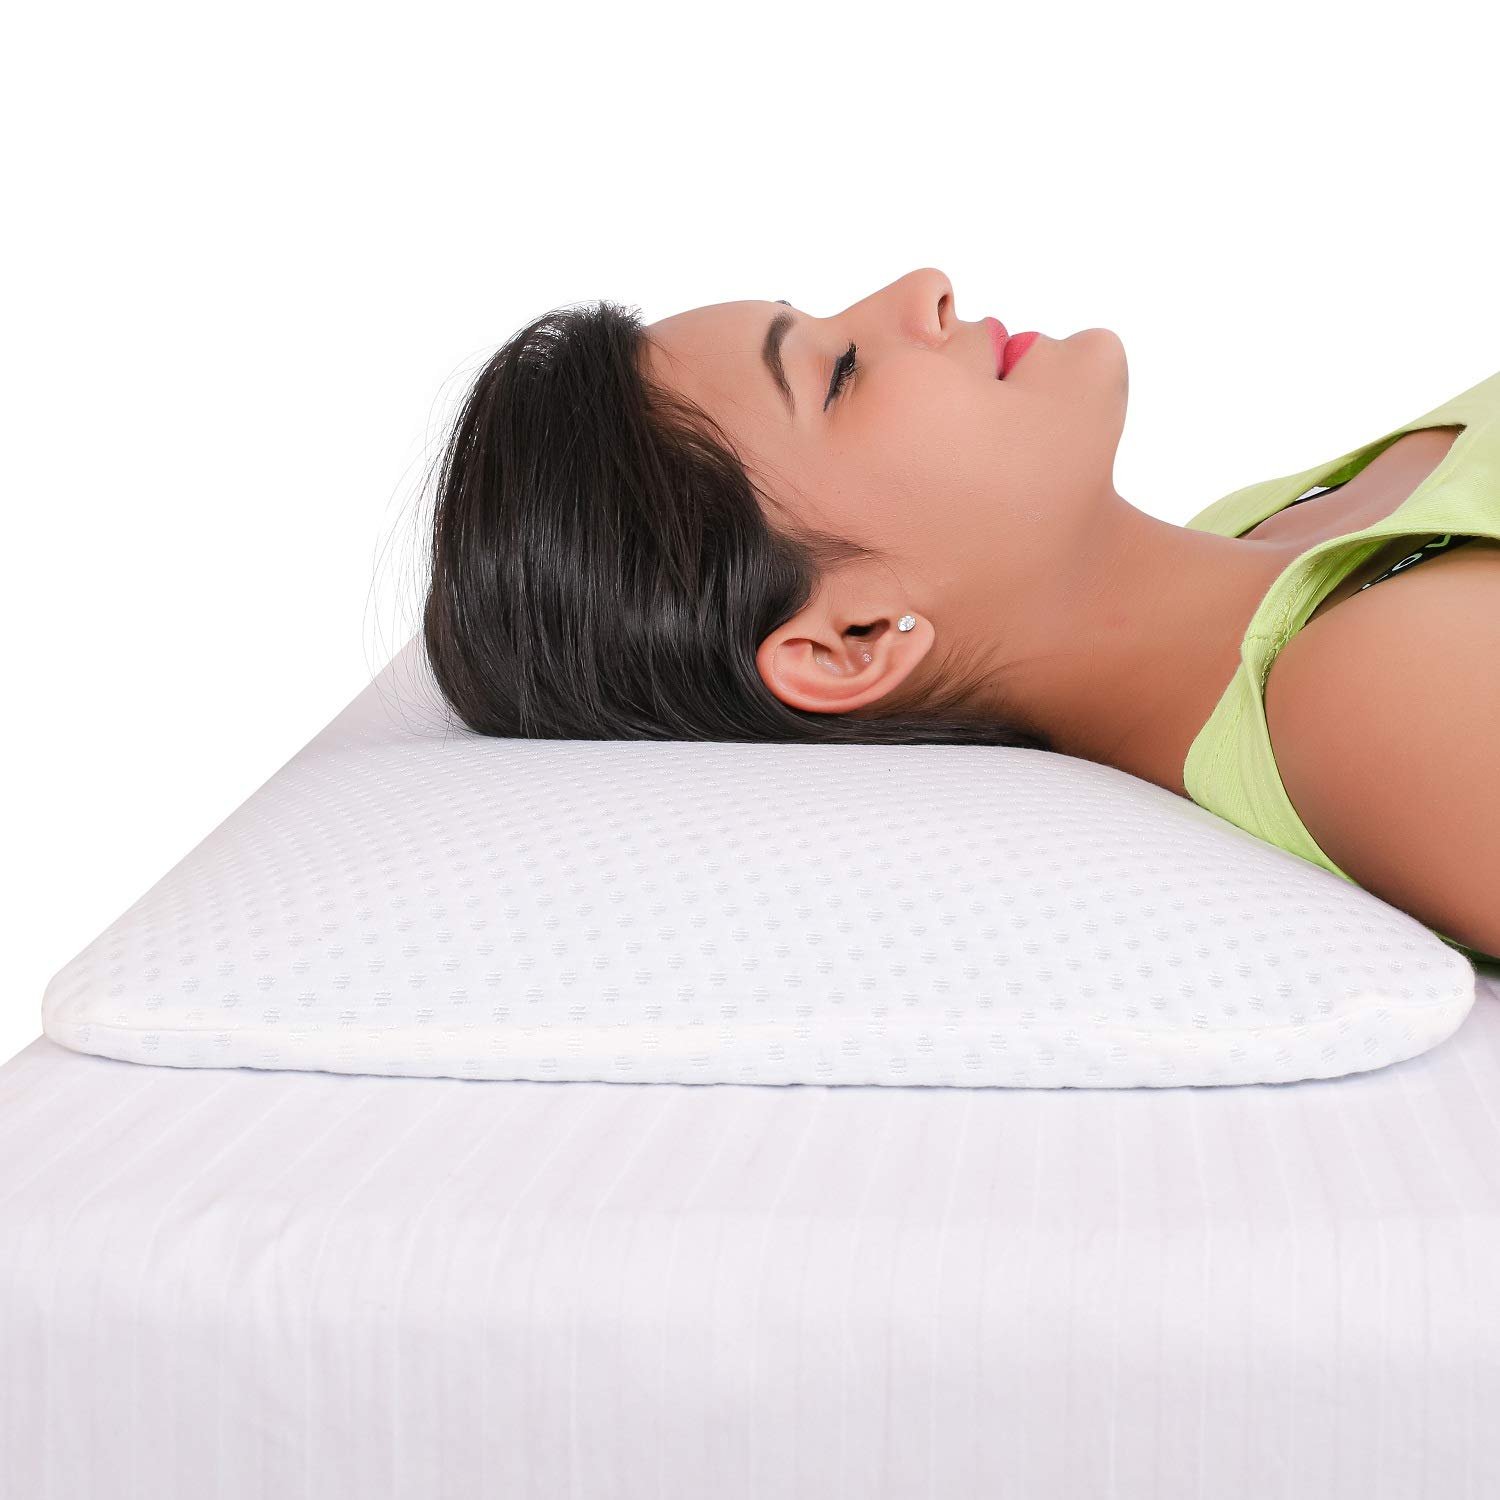 how to make cervical pillow at home